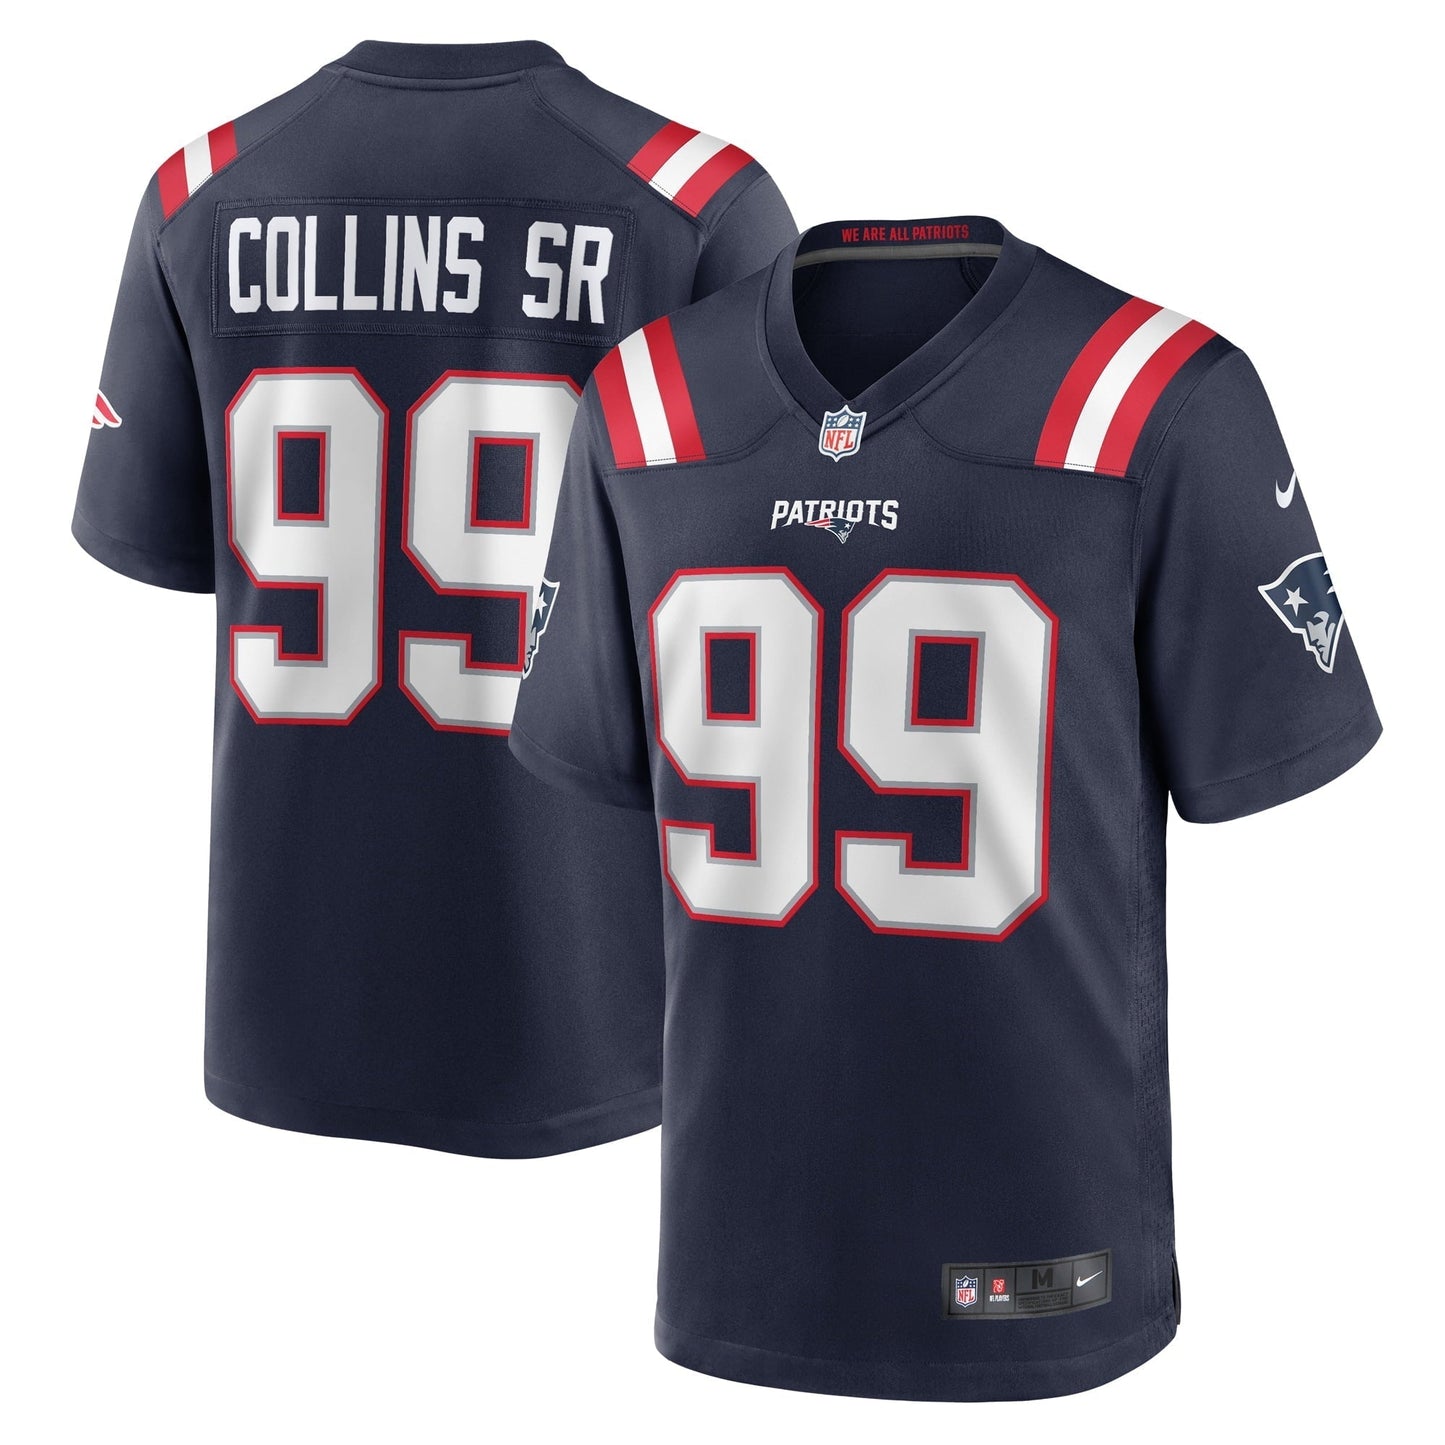 Men's Nike Jamie Collins Sr. Navy New England Patriots Home Game Player Jersey